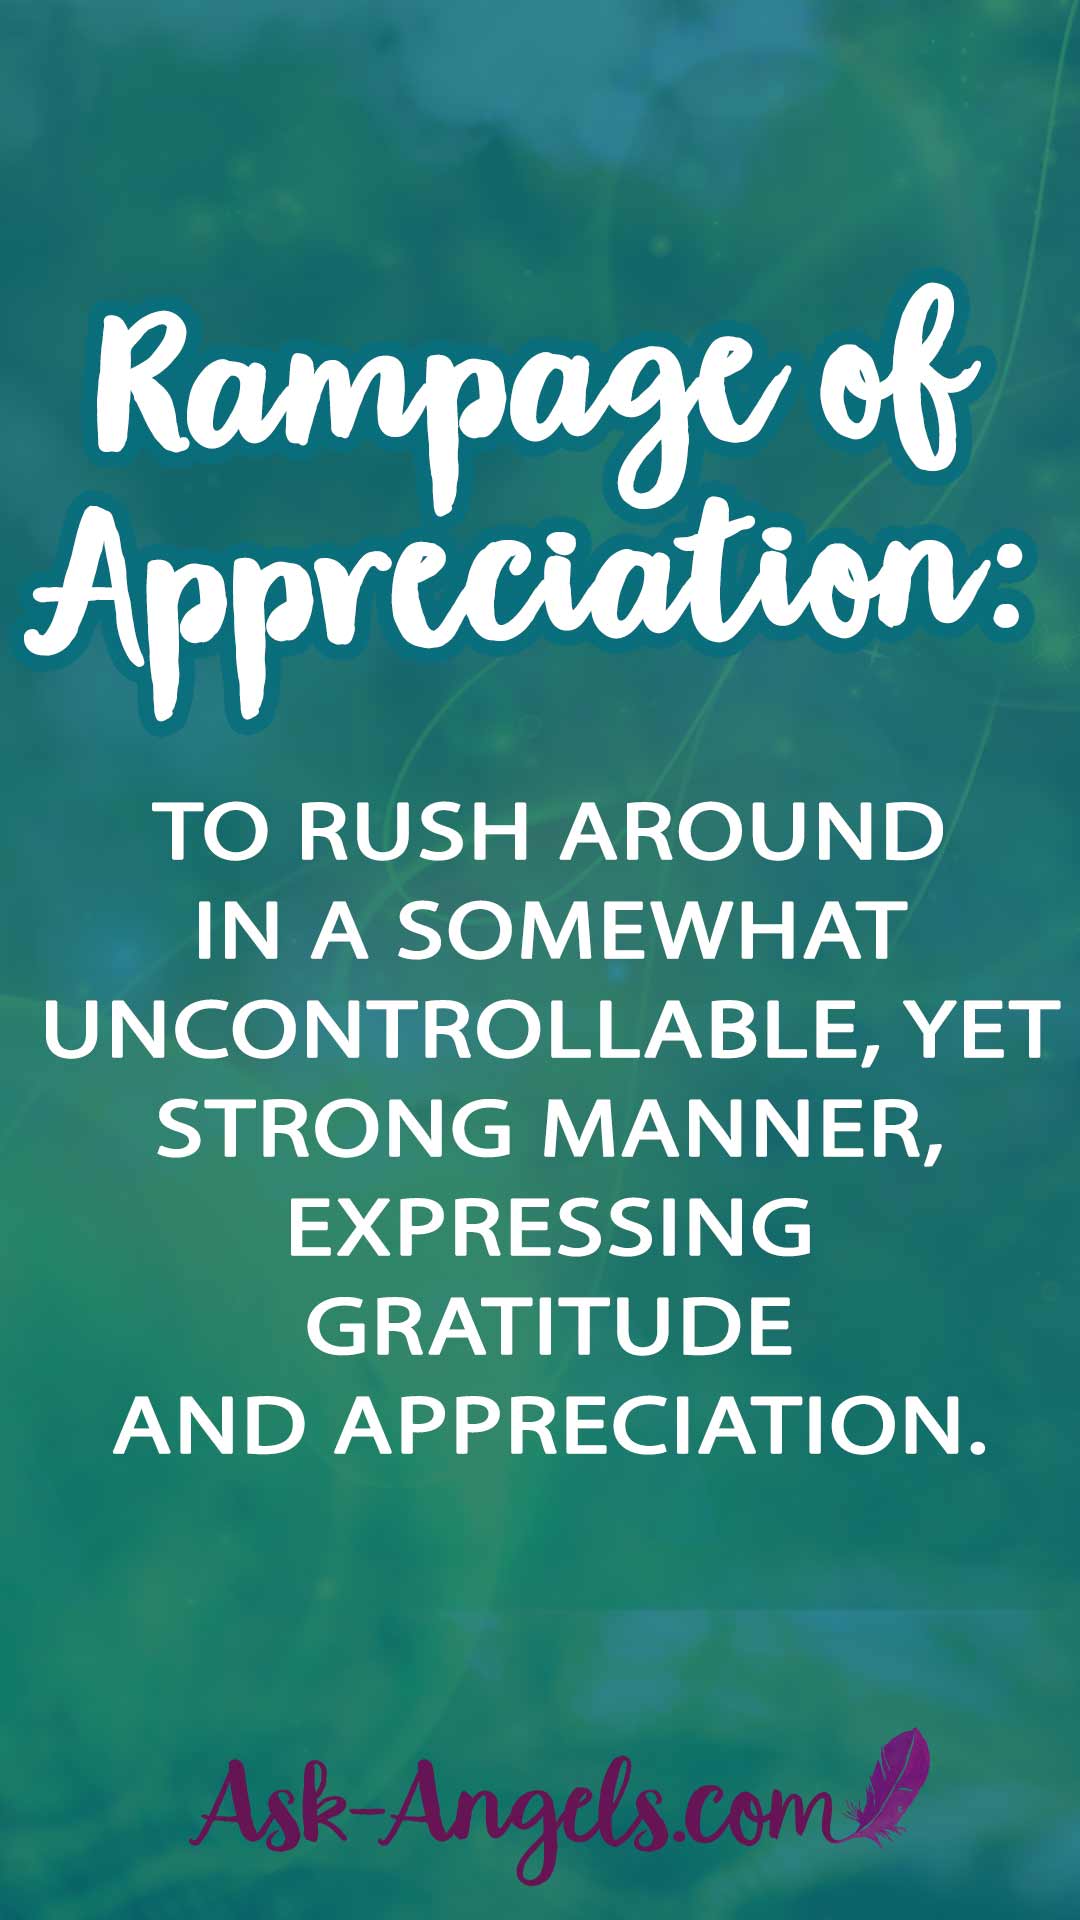 Learn the simple Law of Attraction Practice, the Rampage of Appreciation